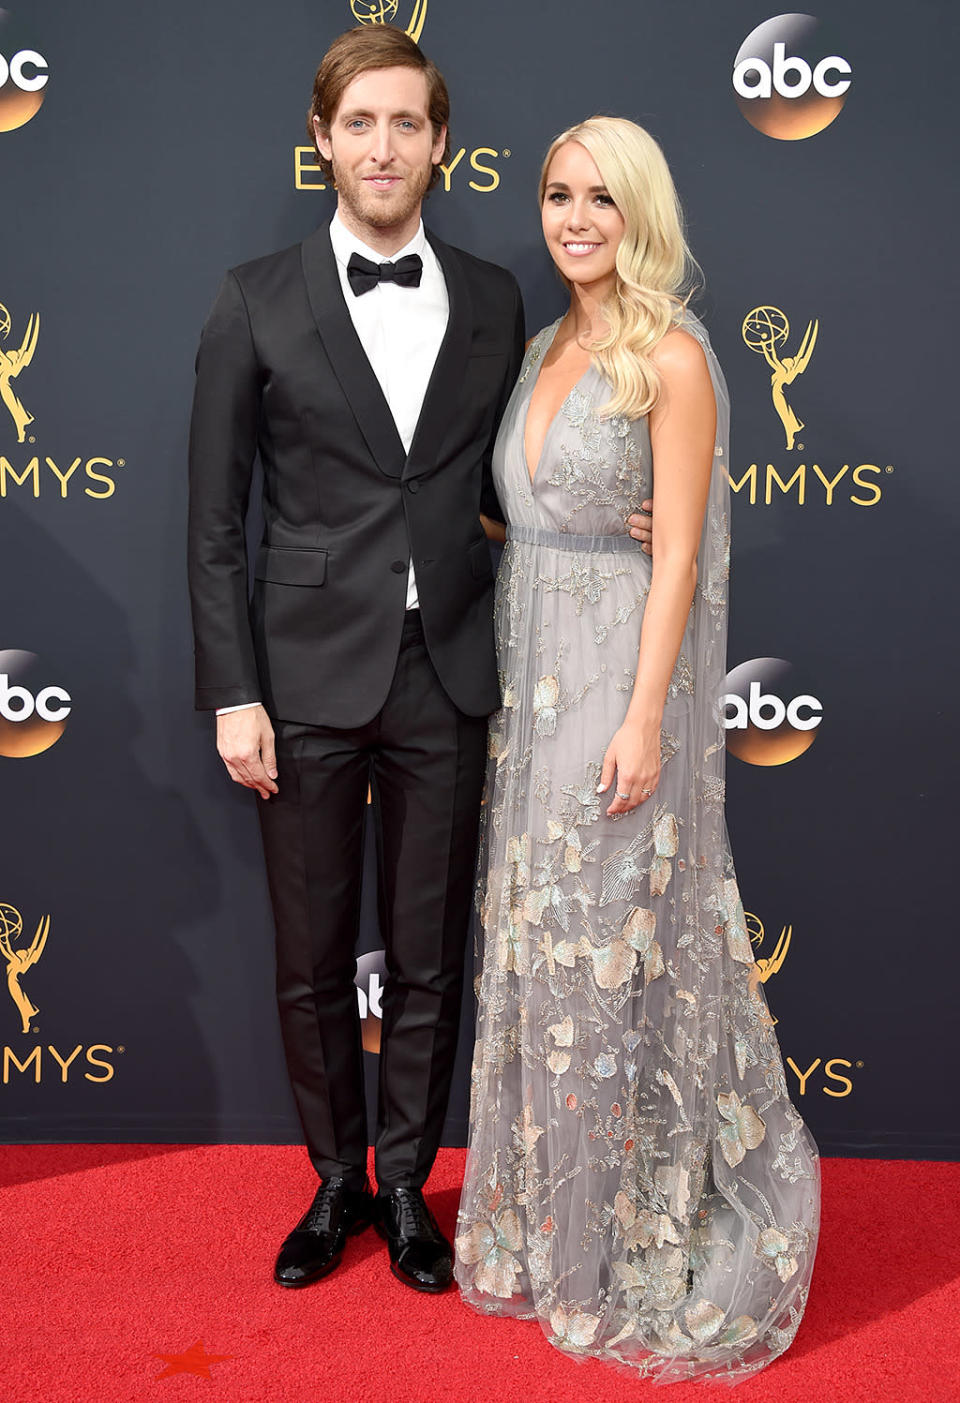 <p>Thomas Middleditch, and Mollie Gates arrives at the 68th Emmy Awards at the Microsoft Theater on September 18, 2016 in Los Angeles, Calif. (Photo by Getty Images)</p>